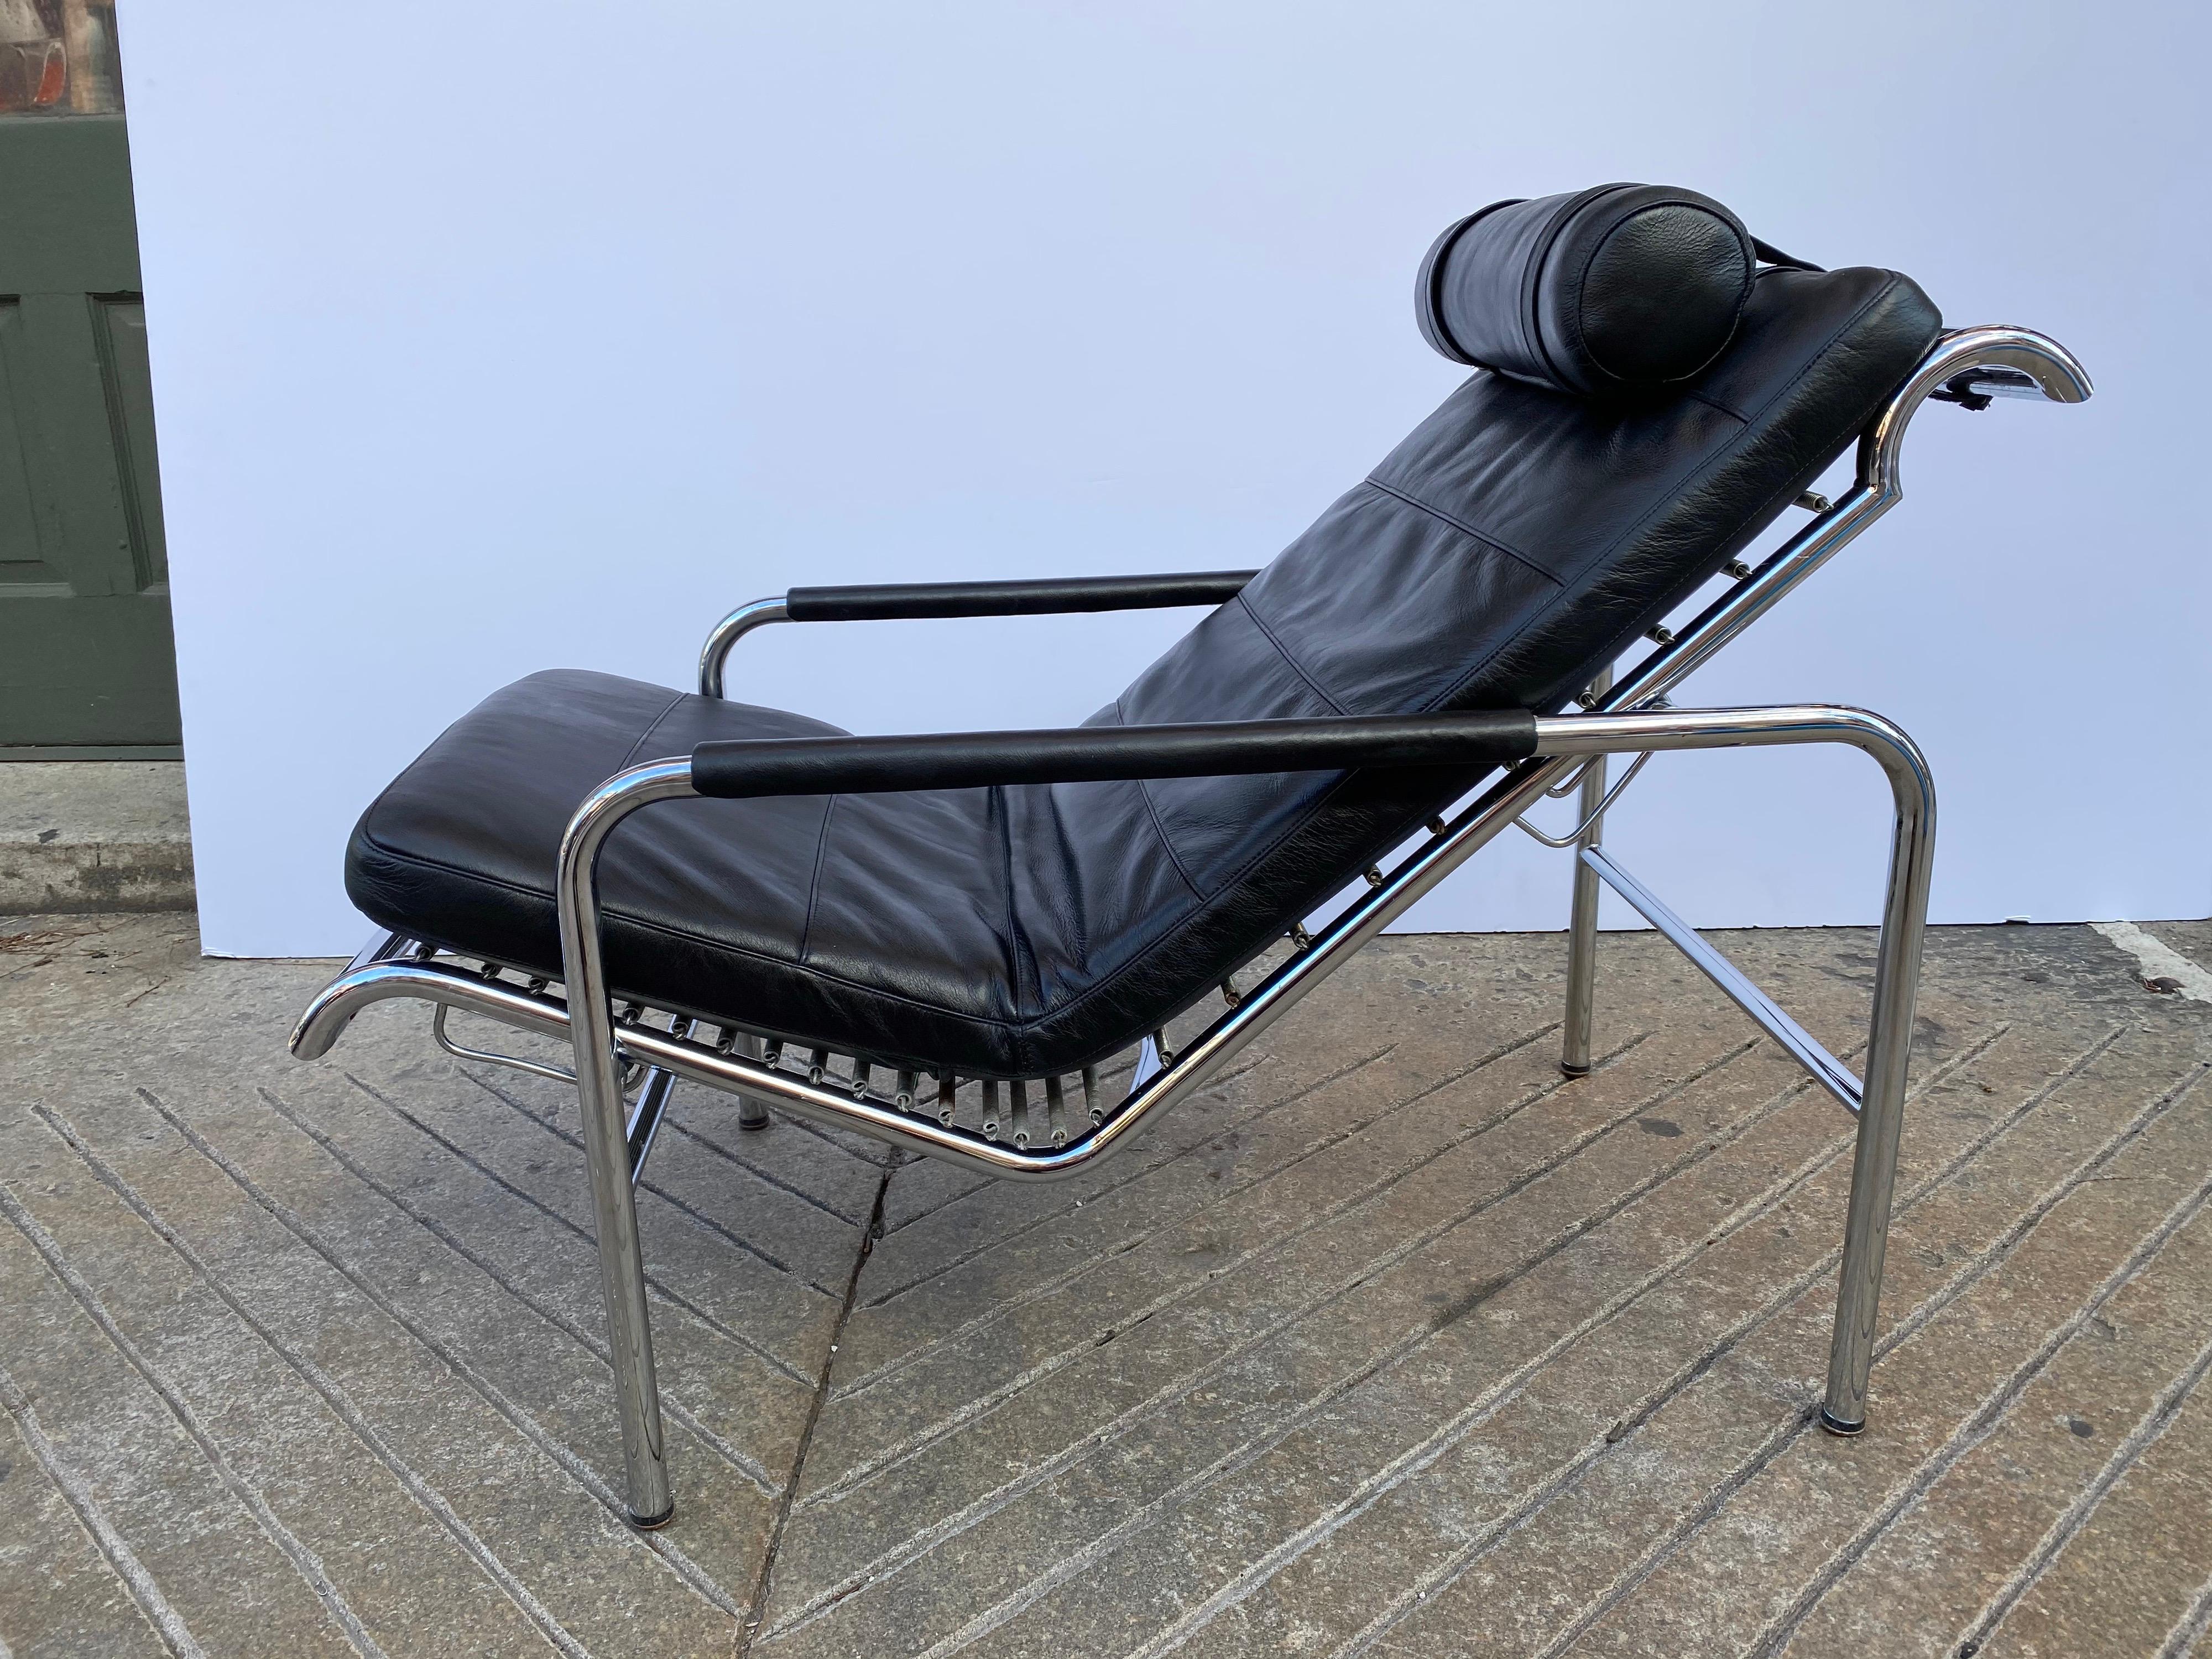 Gabriele Mucchi Genni chrome and leather 2 position lounge chair. Originally Designed in 1935 and Produced by Zanotta in the 1980's very comfortable chair that sits very well! New leather cushion. Chrome is very clean.